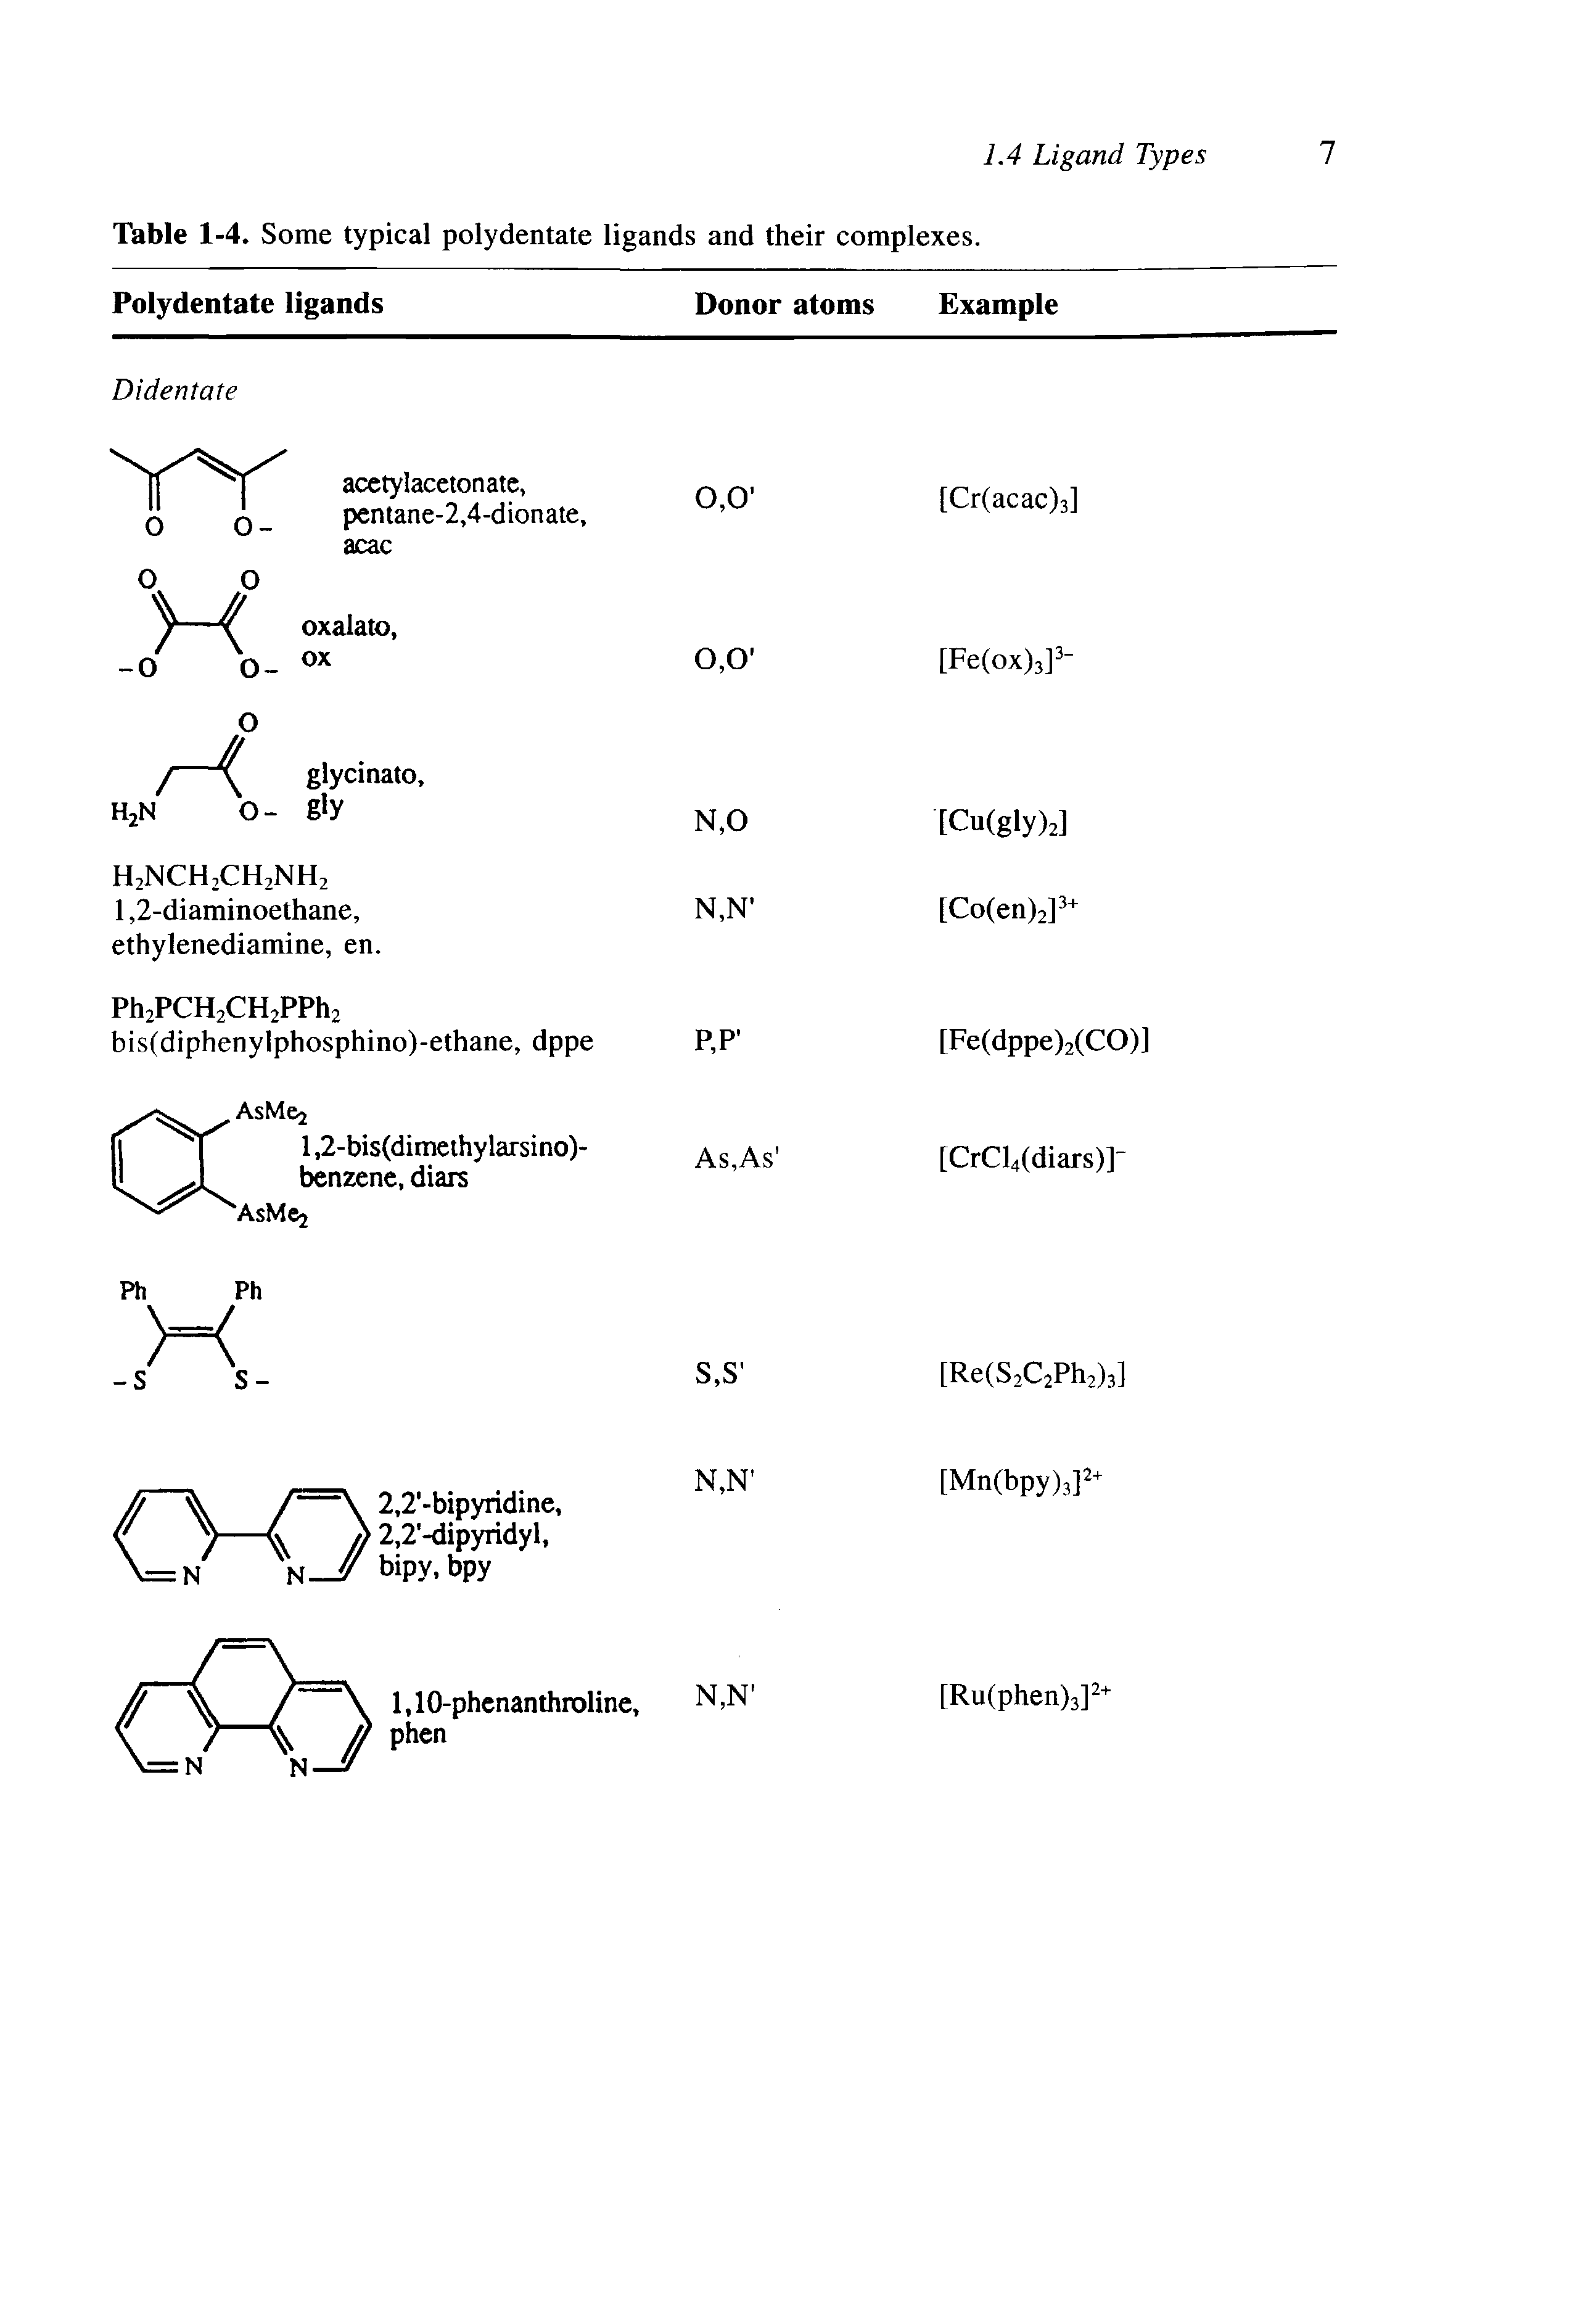 Table 1-4. Some typical polydentate ligands and their complexes.